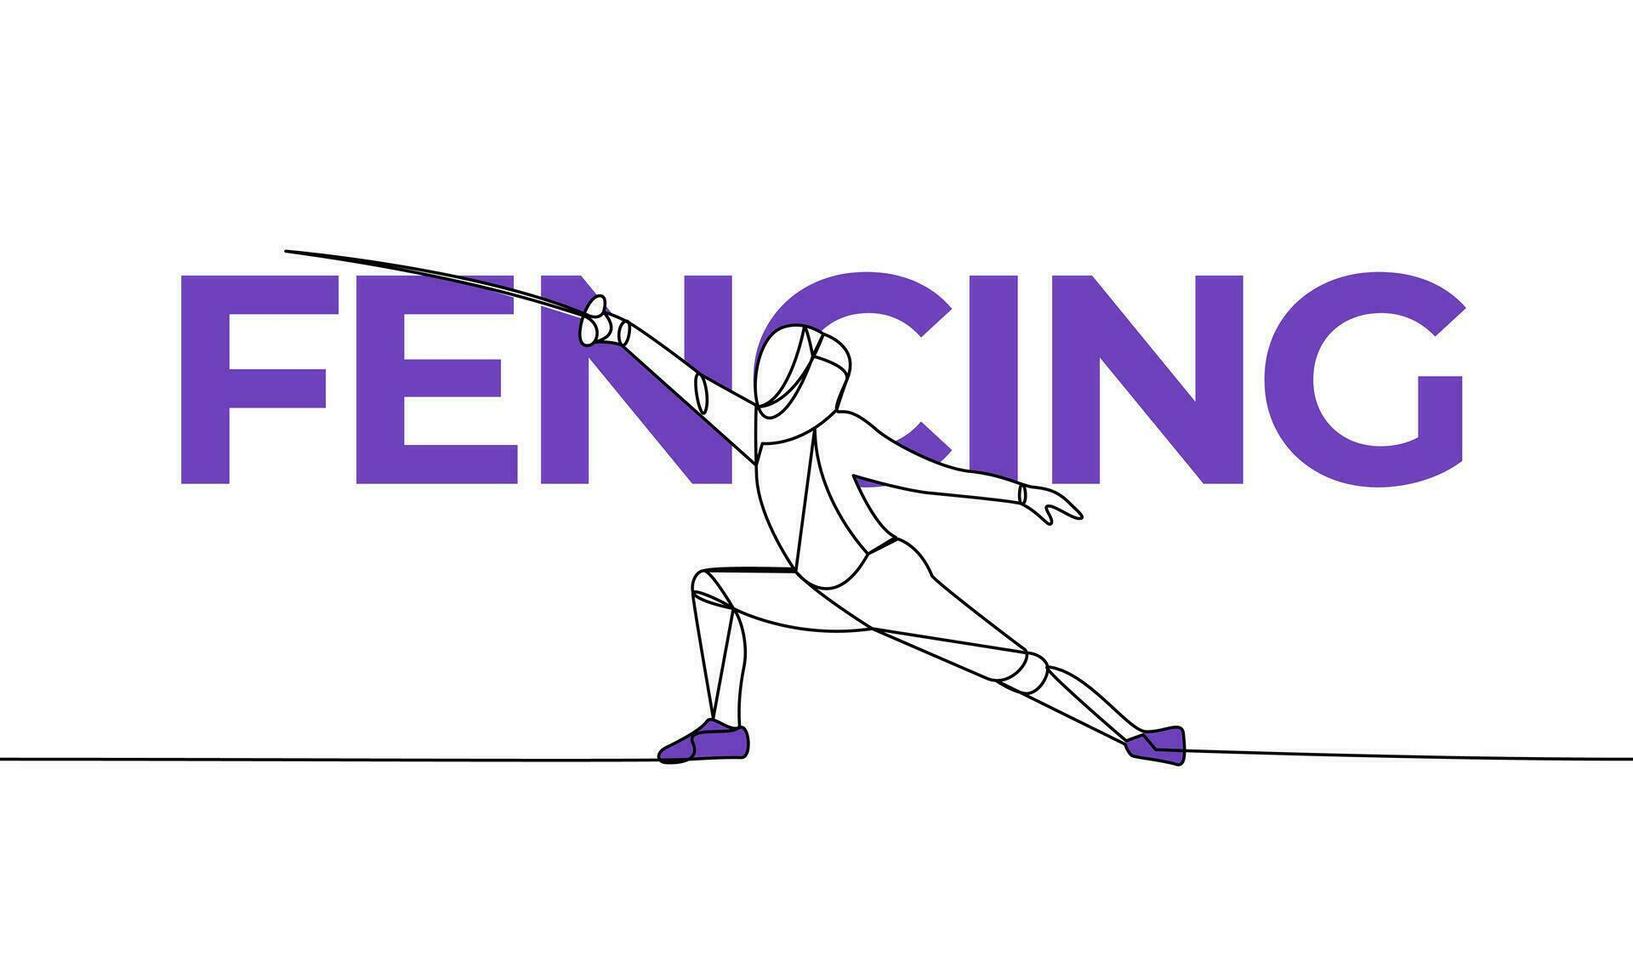 Single continuous fencer pattern. Type of sport, Fencing. Colored elements and title. One line vector